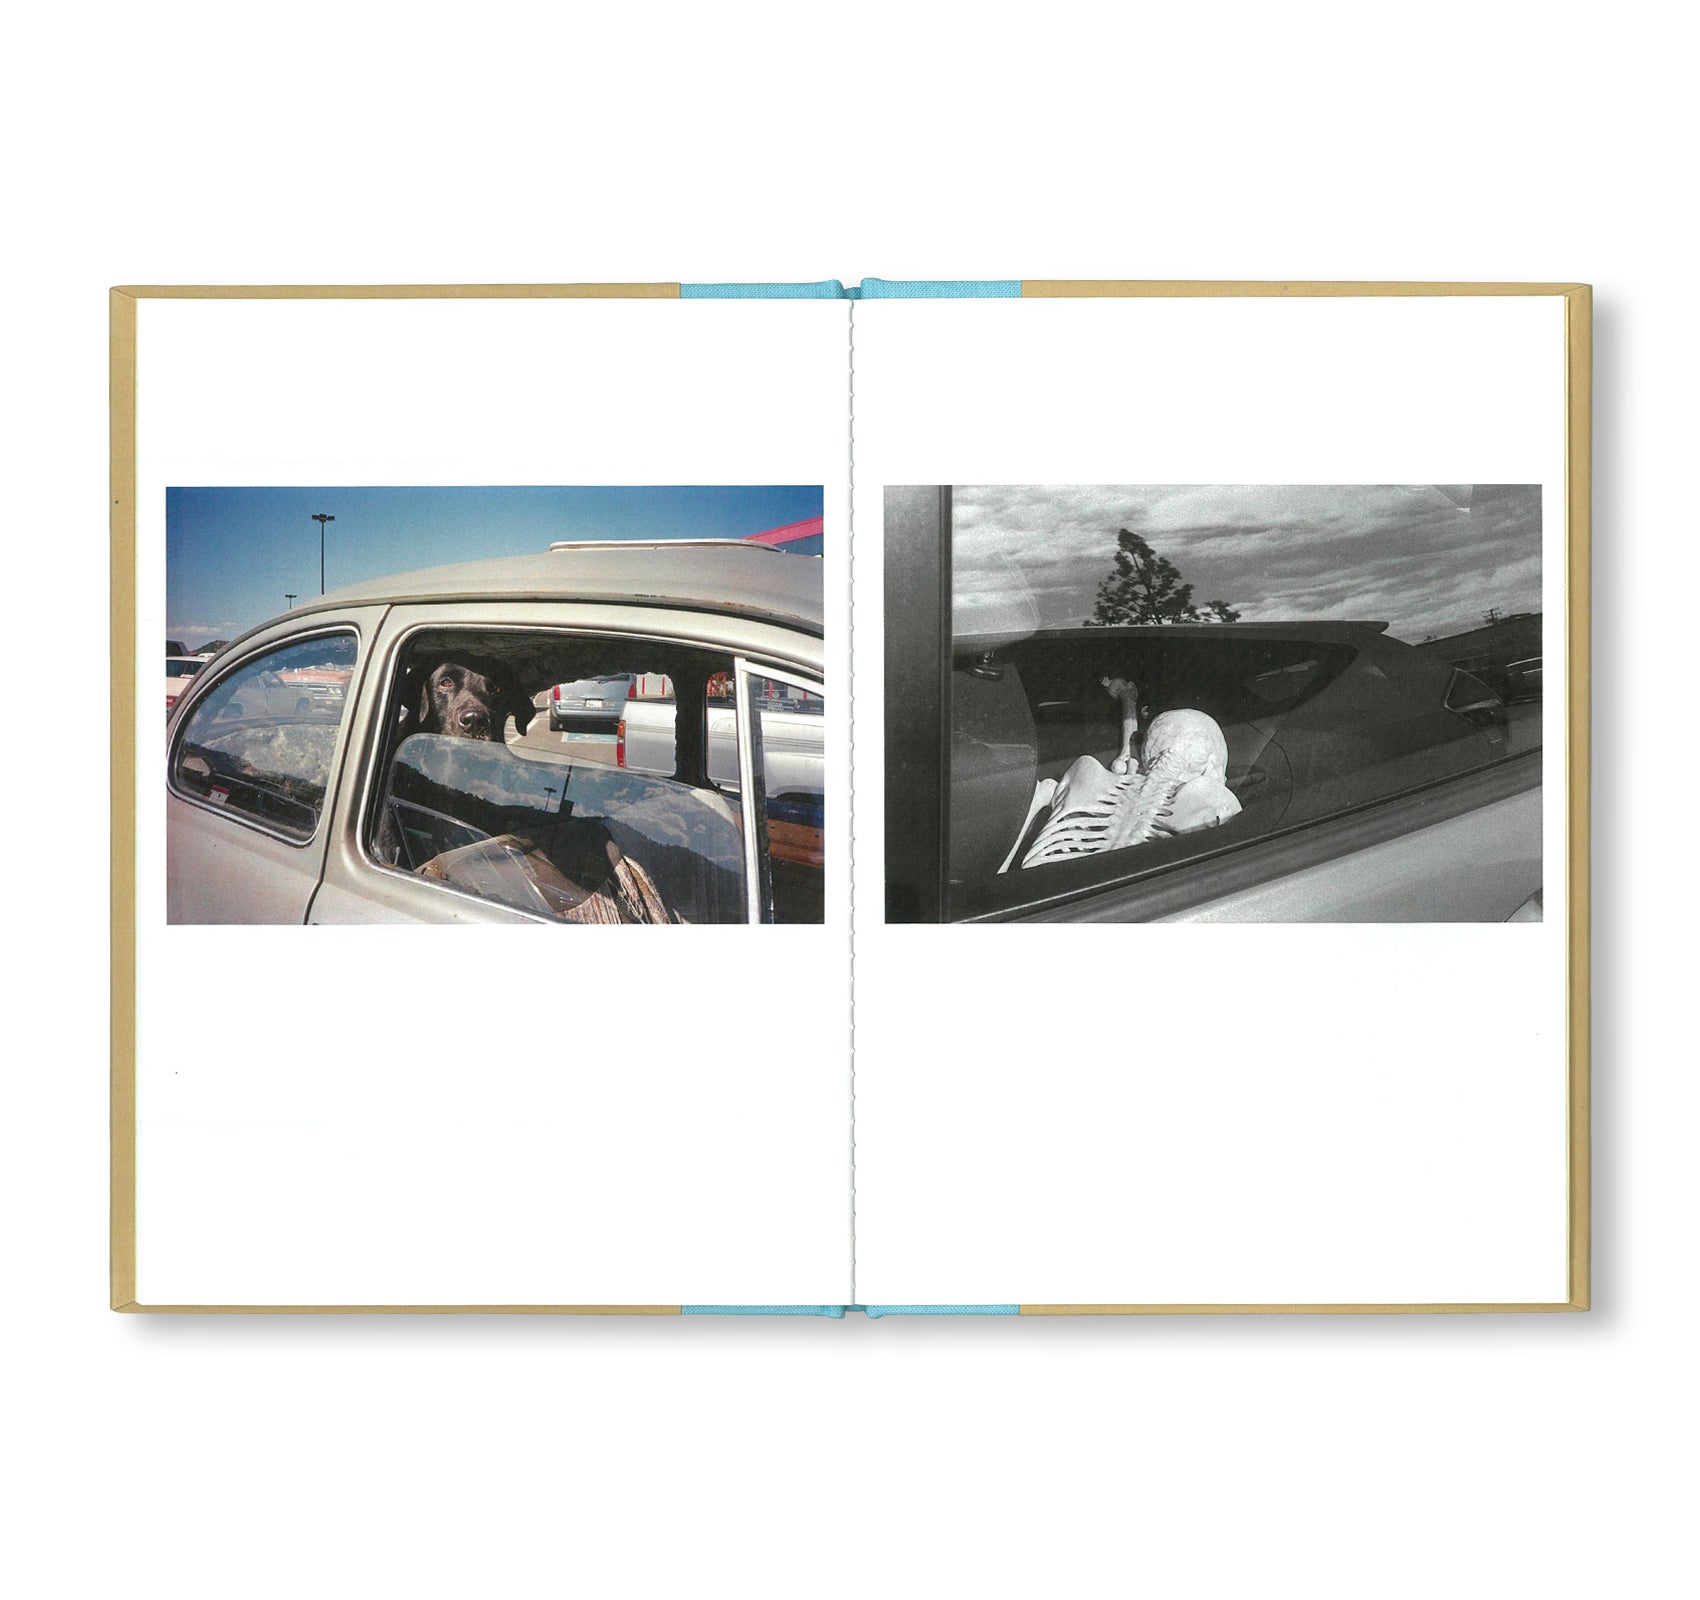 ONE PICTURE BOOK TWO #22: AUTO-HYPNOSIS by Ed Templeton